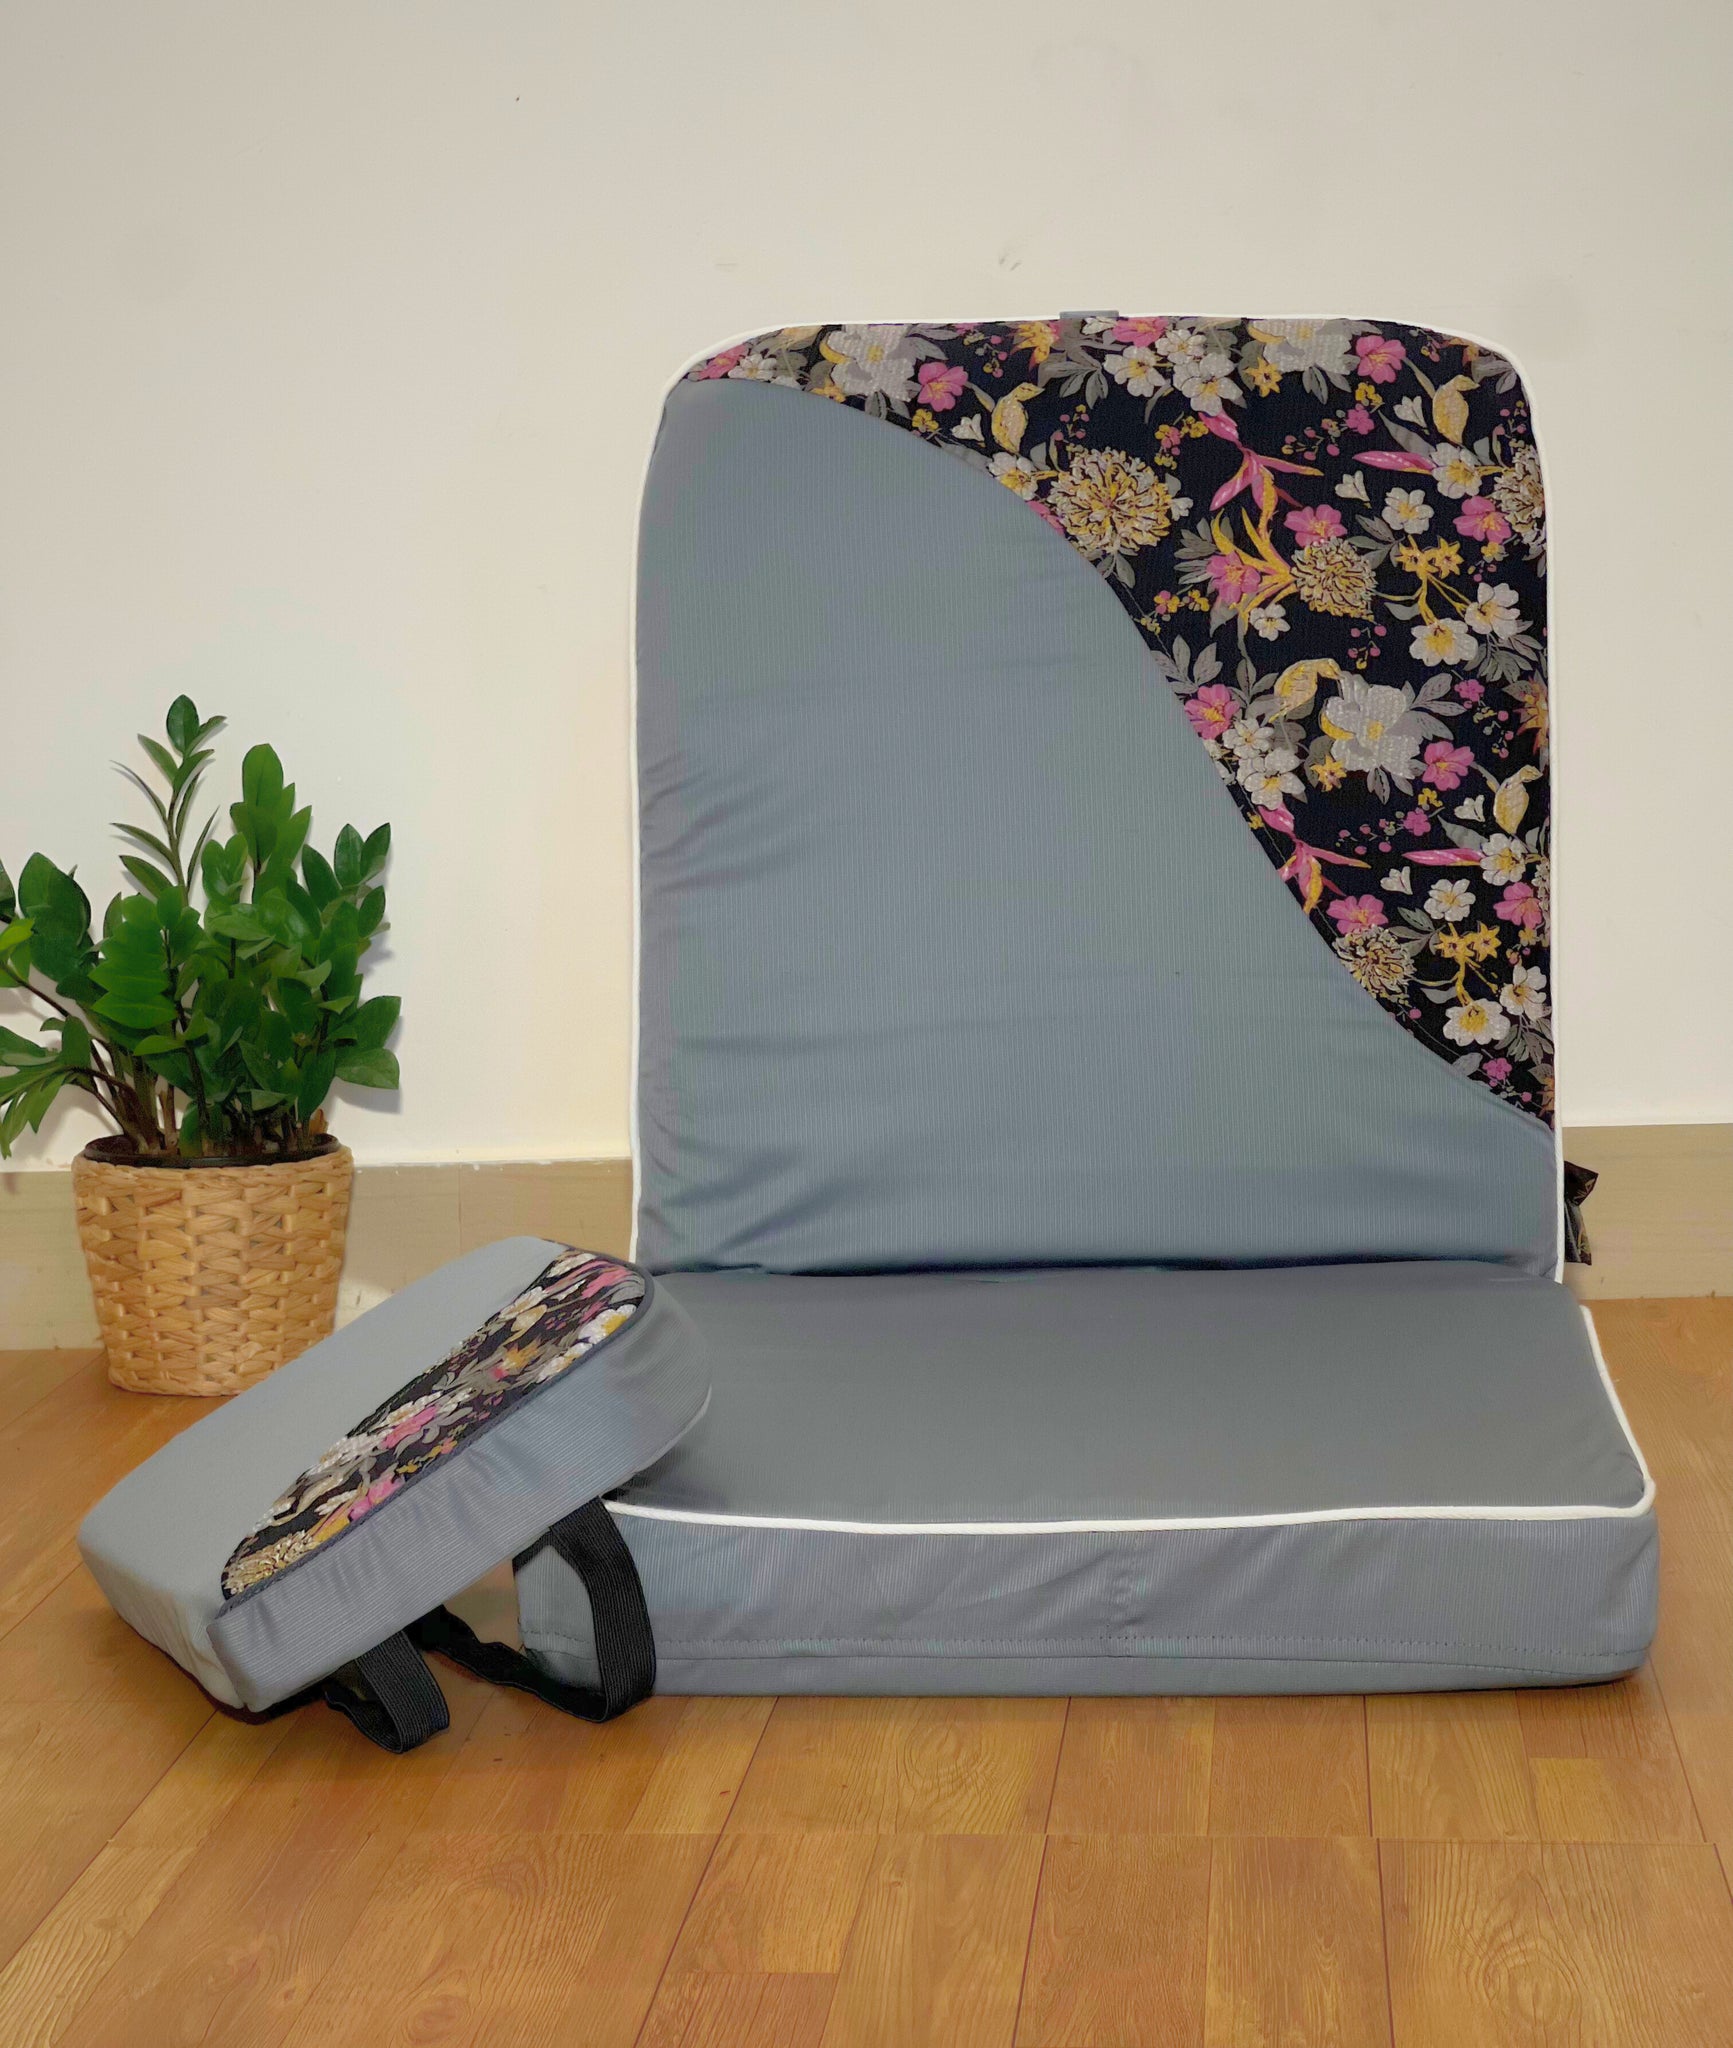 MEDITATION CHAIR WITH CUSHION FOLDABLE LIGHTWEIGHT PORTABLE BACK SUPPORT